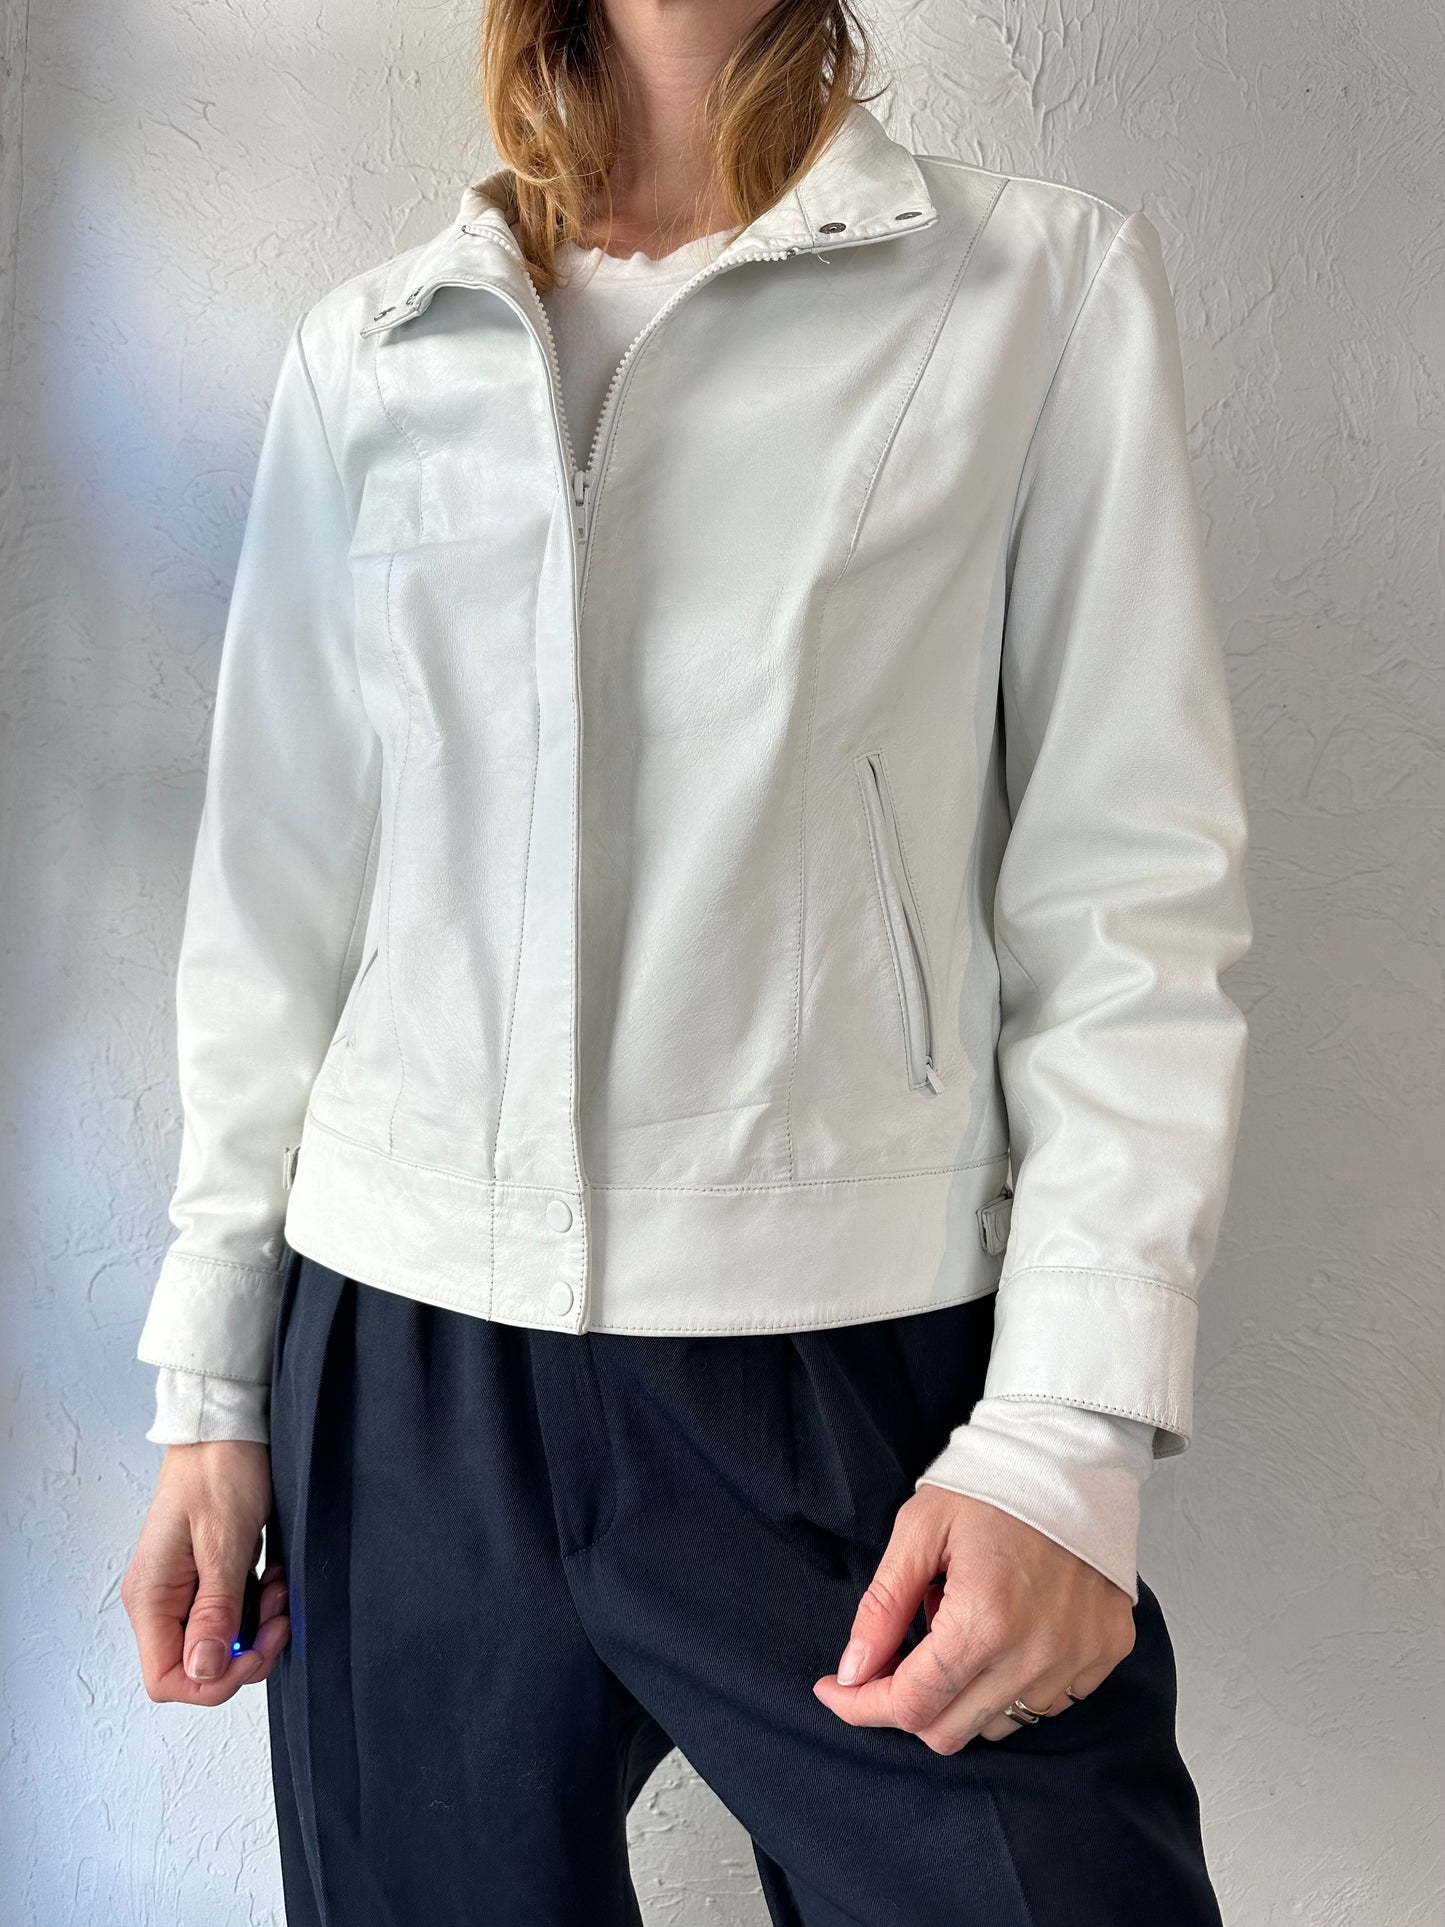 90s 'Winlit' White Leather Jacket / Small